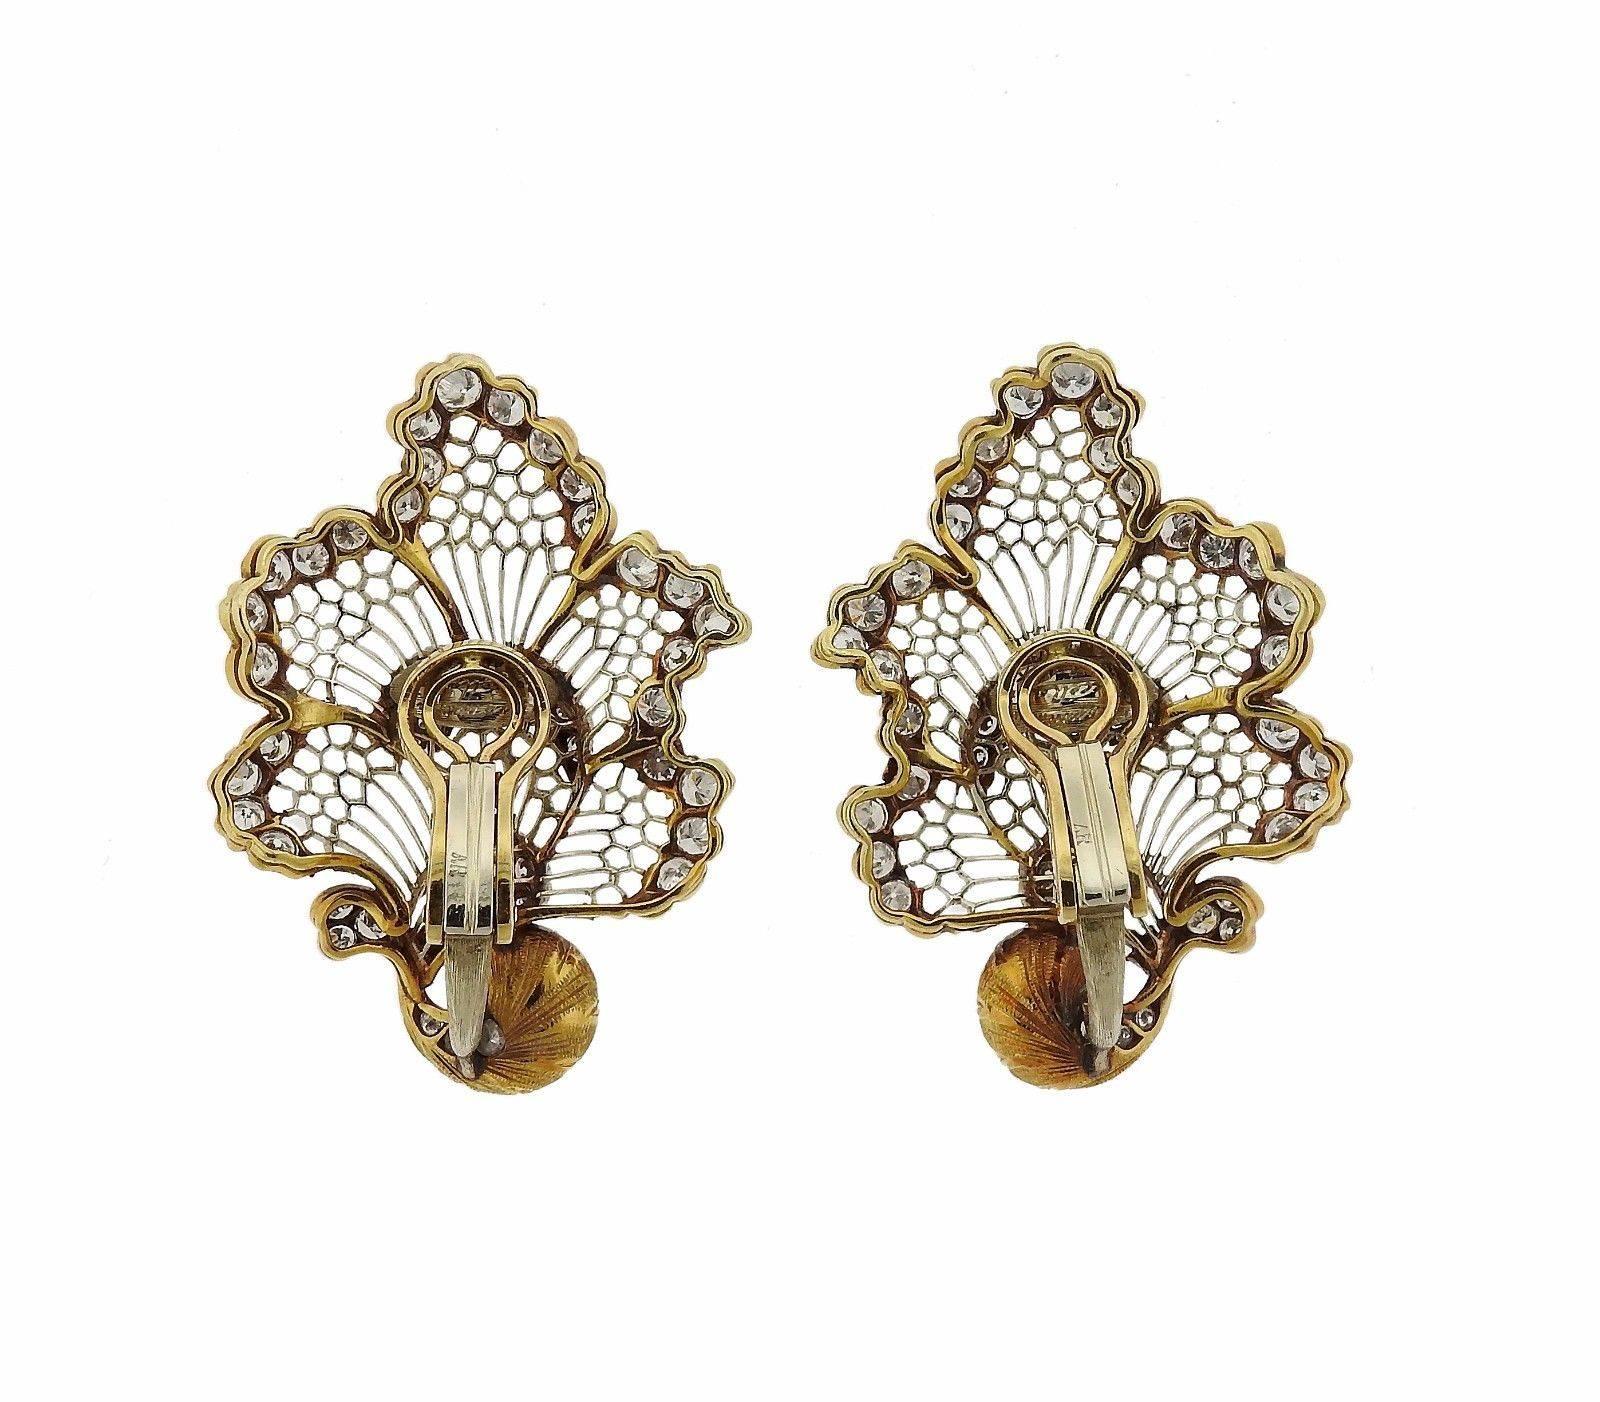 Exquisite Buccellati Honeycomb Gold Diamond Earrings In Excellent Condition For Sale In Lambertville, NJ